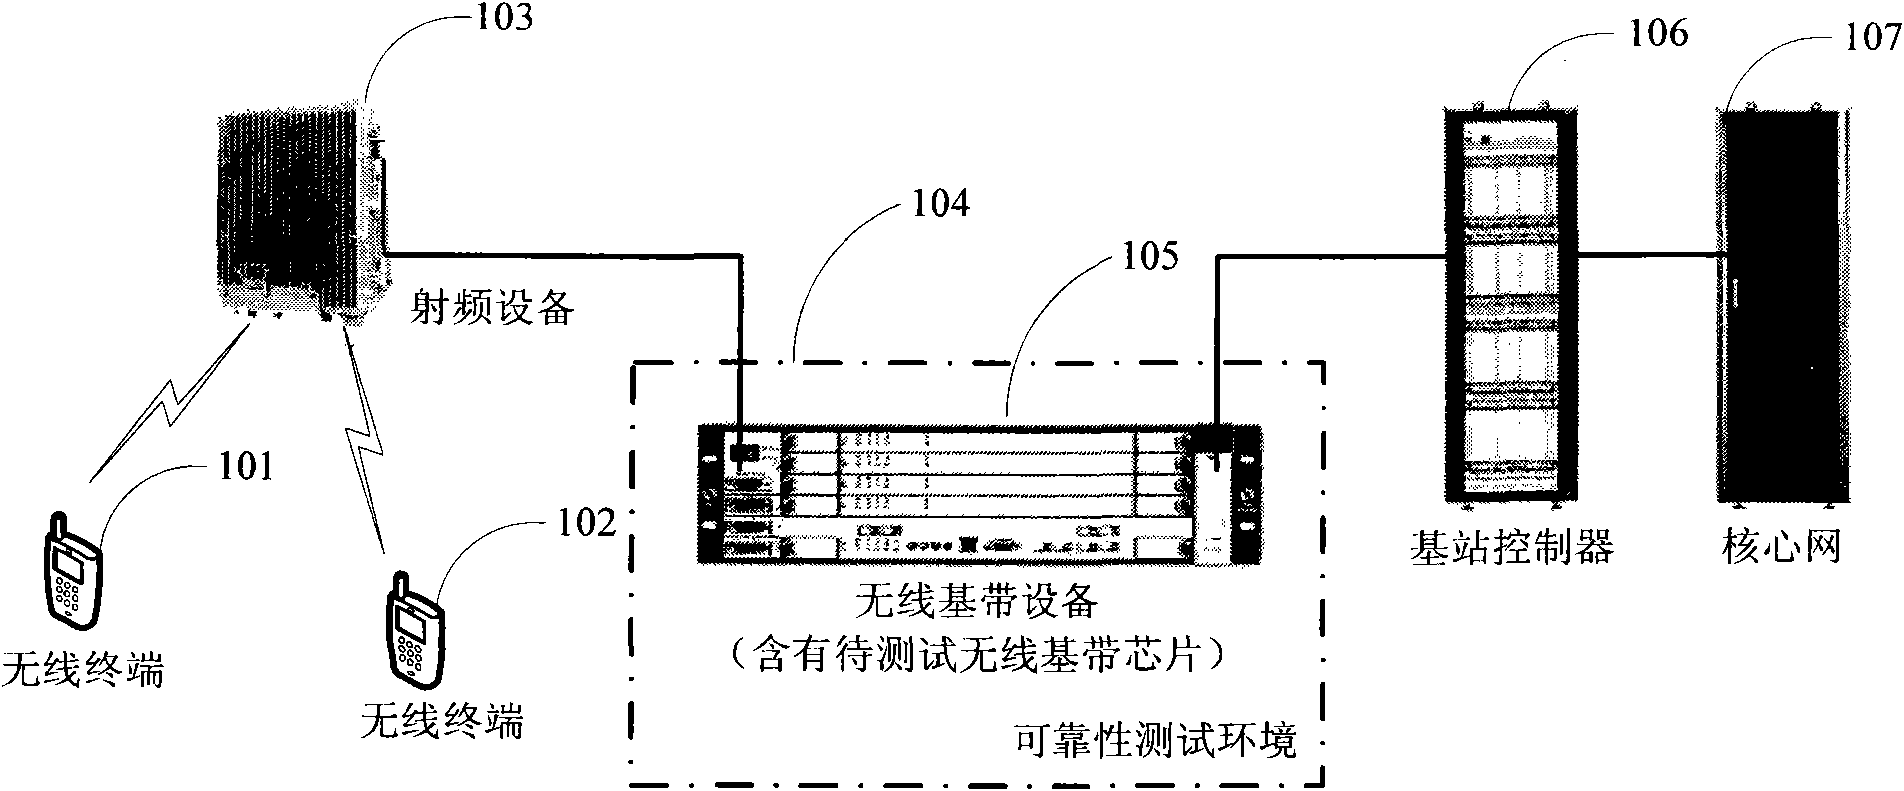 Device and method for testing wireless baseband chips in base station side